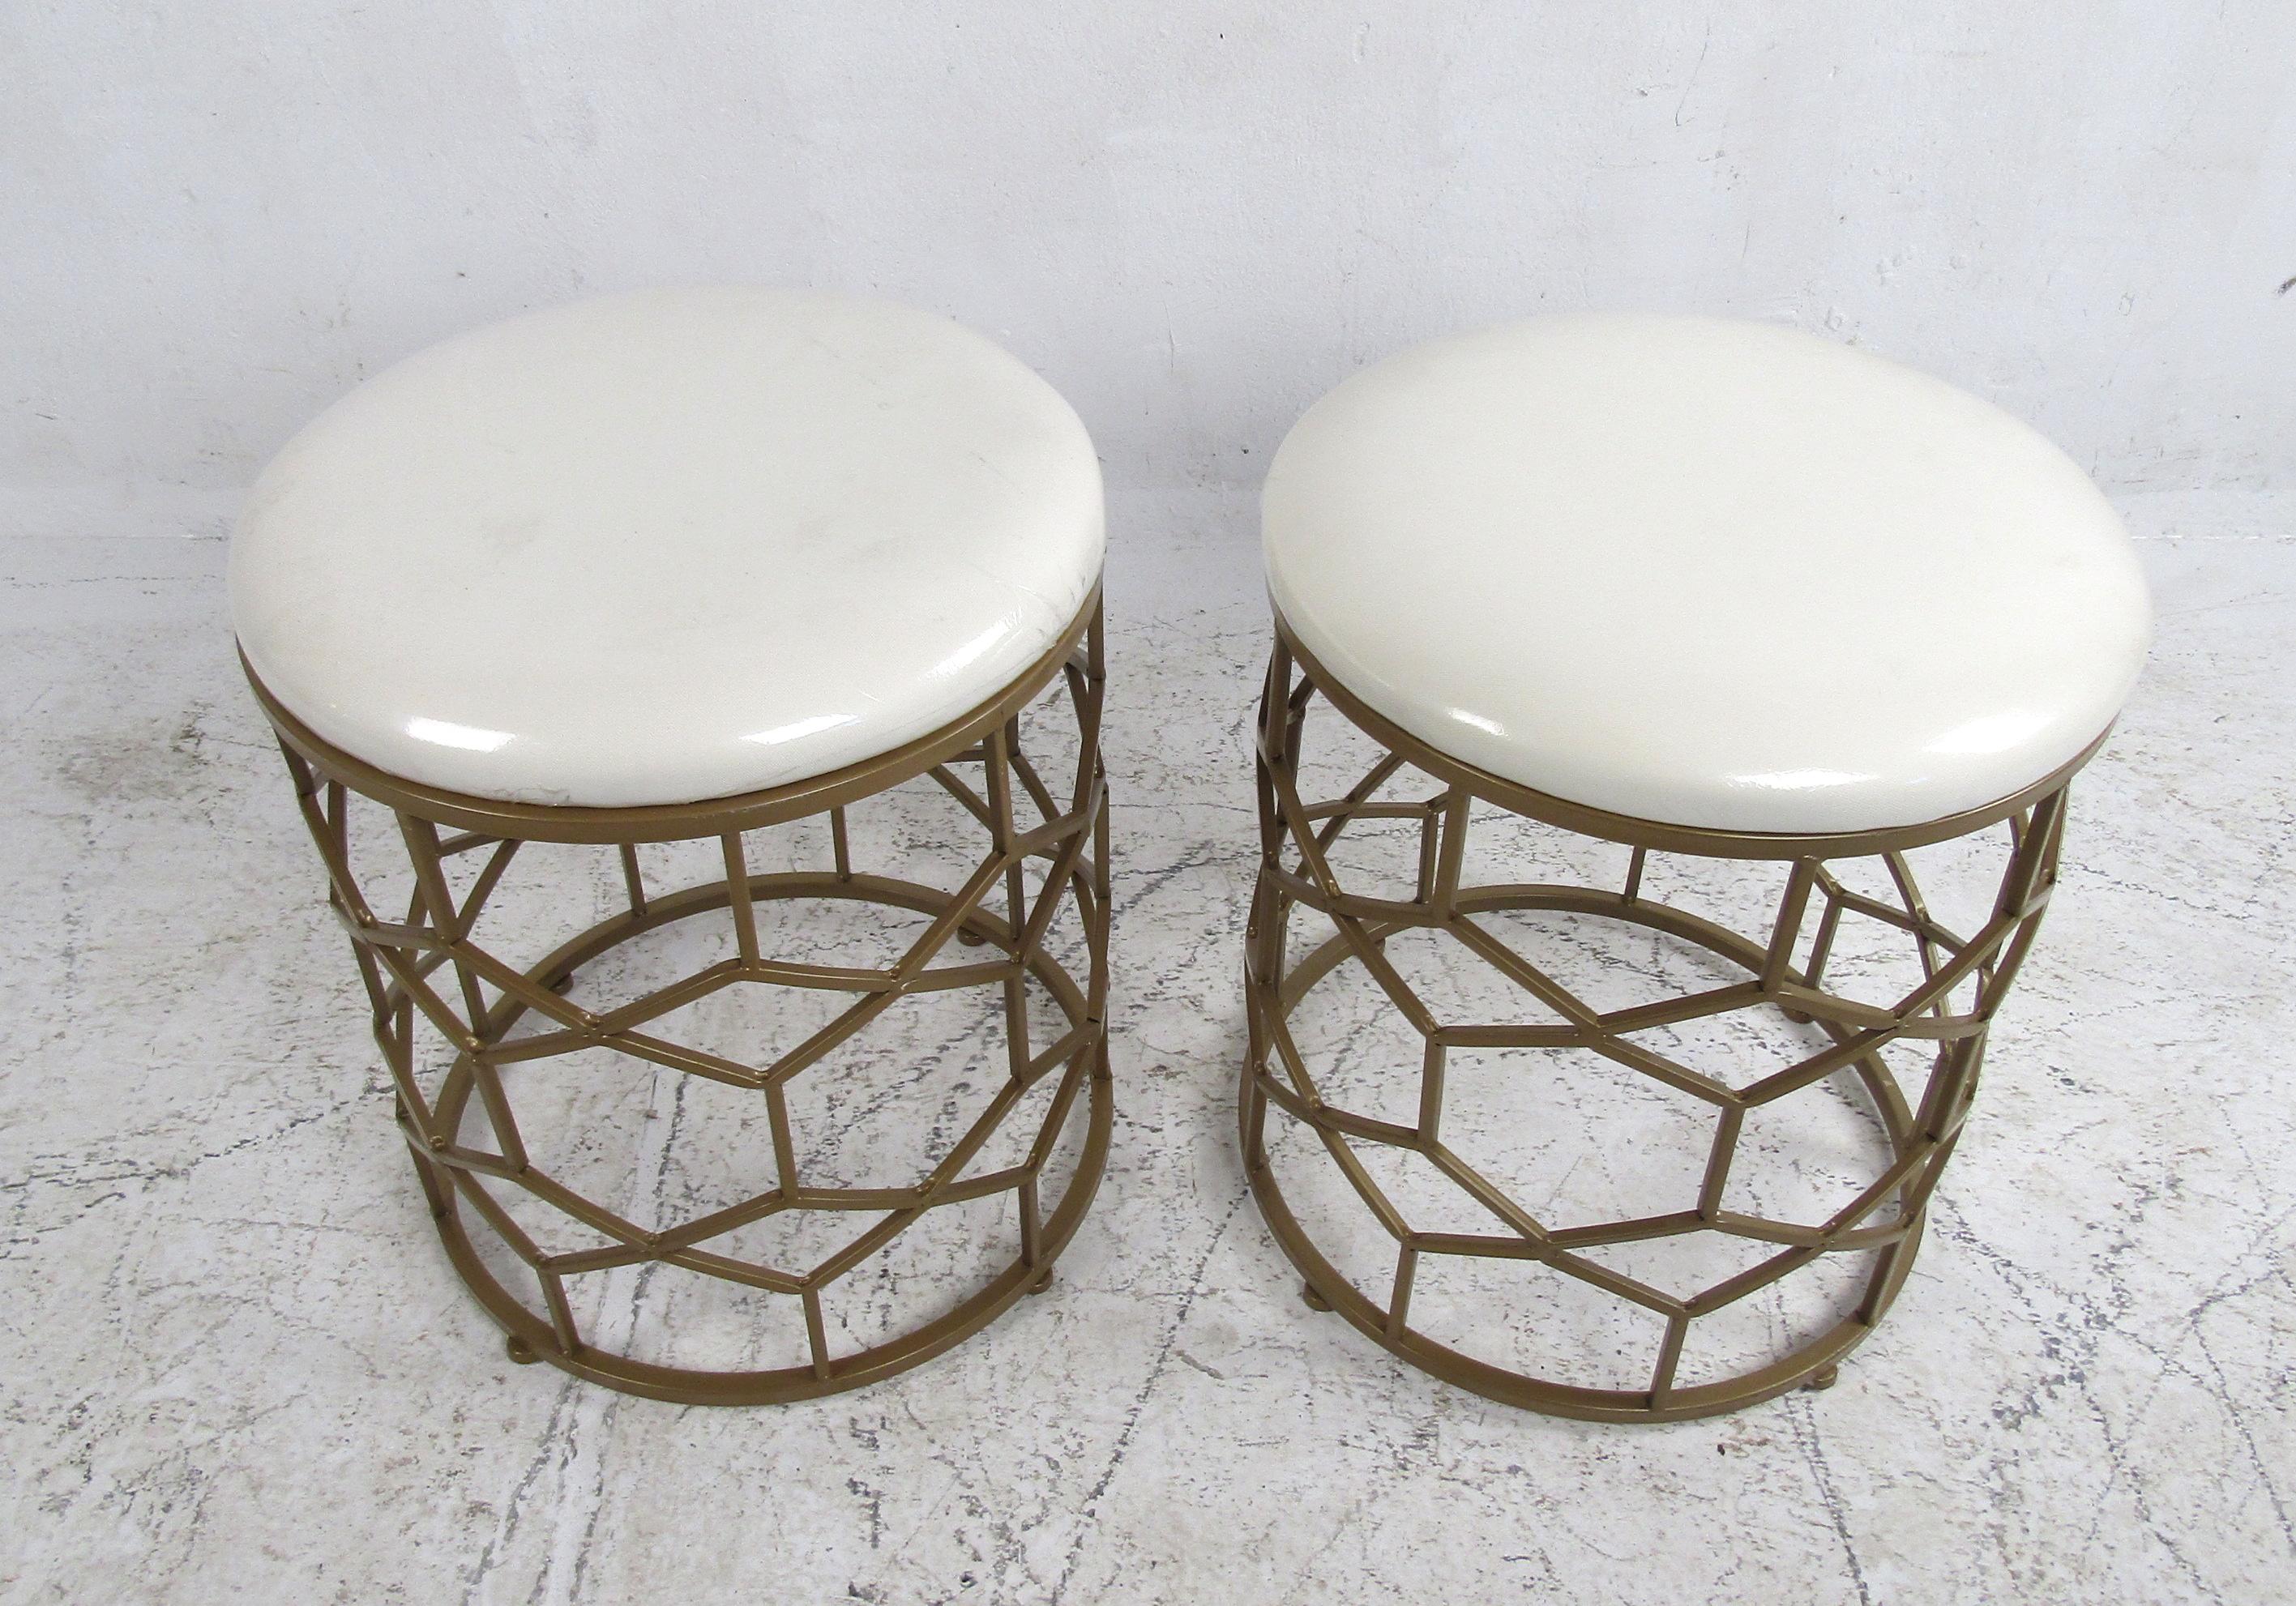 A stunning pair of contemporary modern ottomans boast thick padded tops covered in white vinyl upholstery and unusual faux brass bases. A versatile design that offers comfort without sacrificing style. A lovely circular design that is sure to